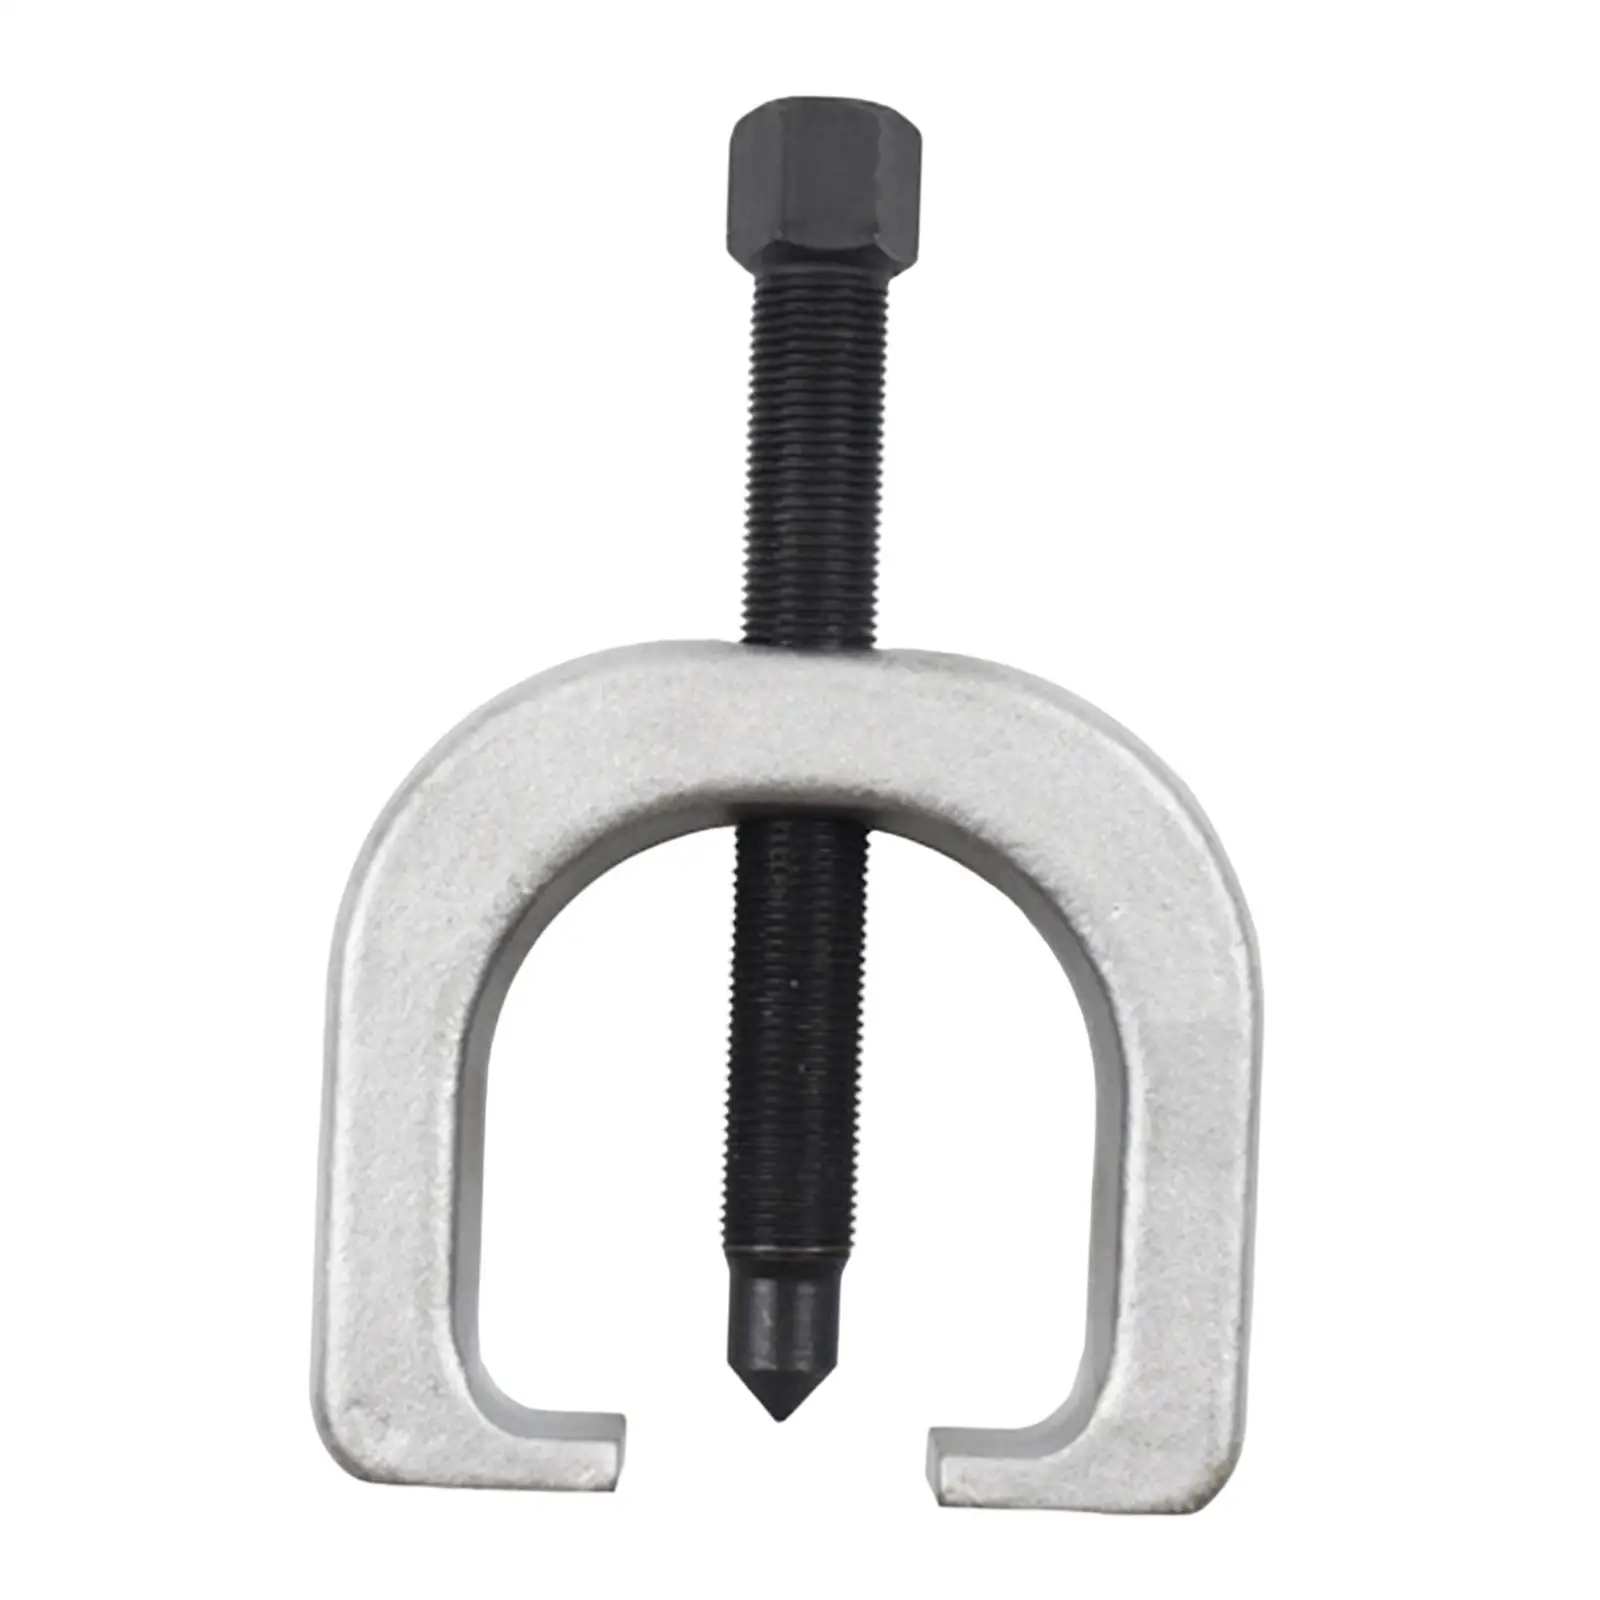 Slack Adjuster Puller Easy to Operate Compact Sturdy Professional Carbon Steel